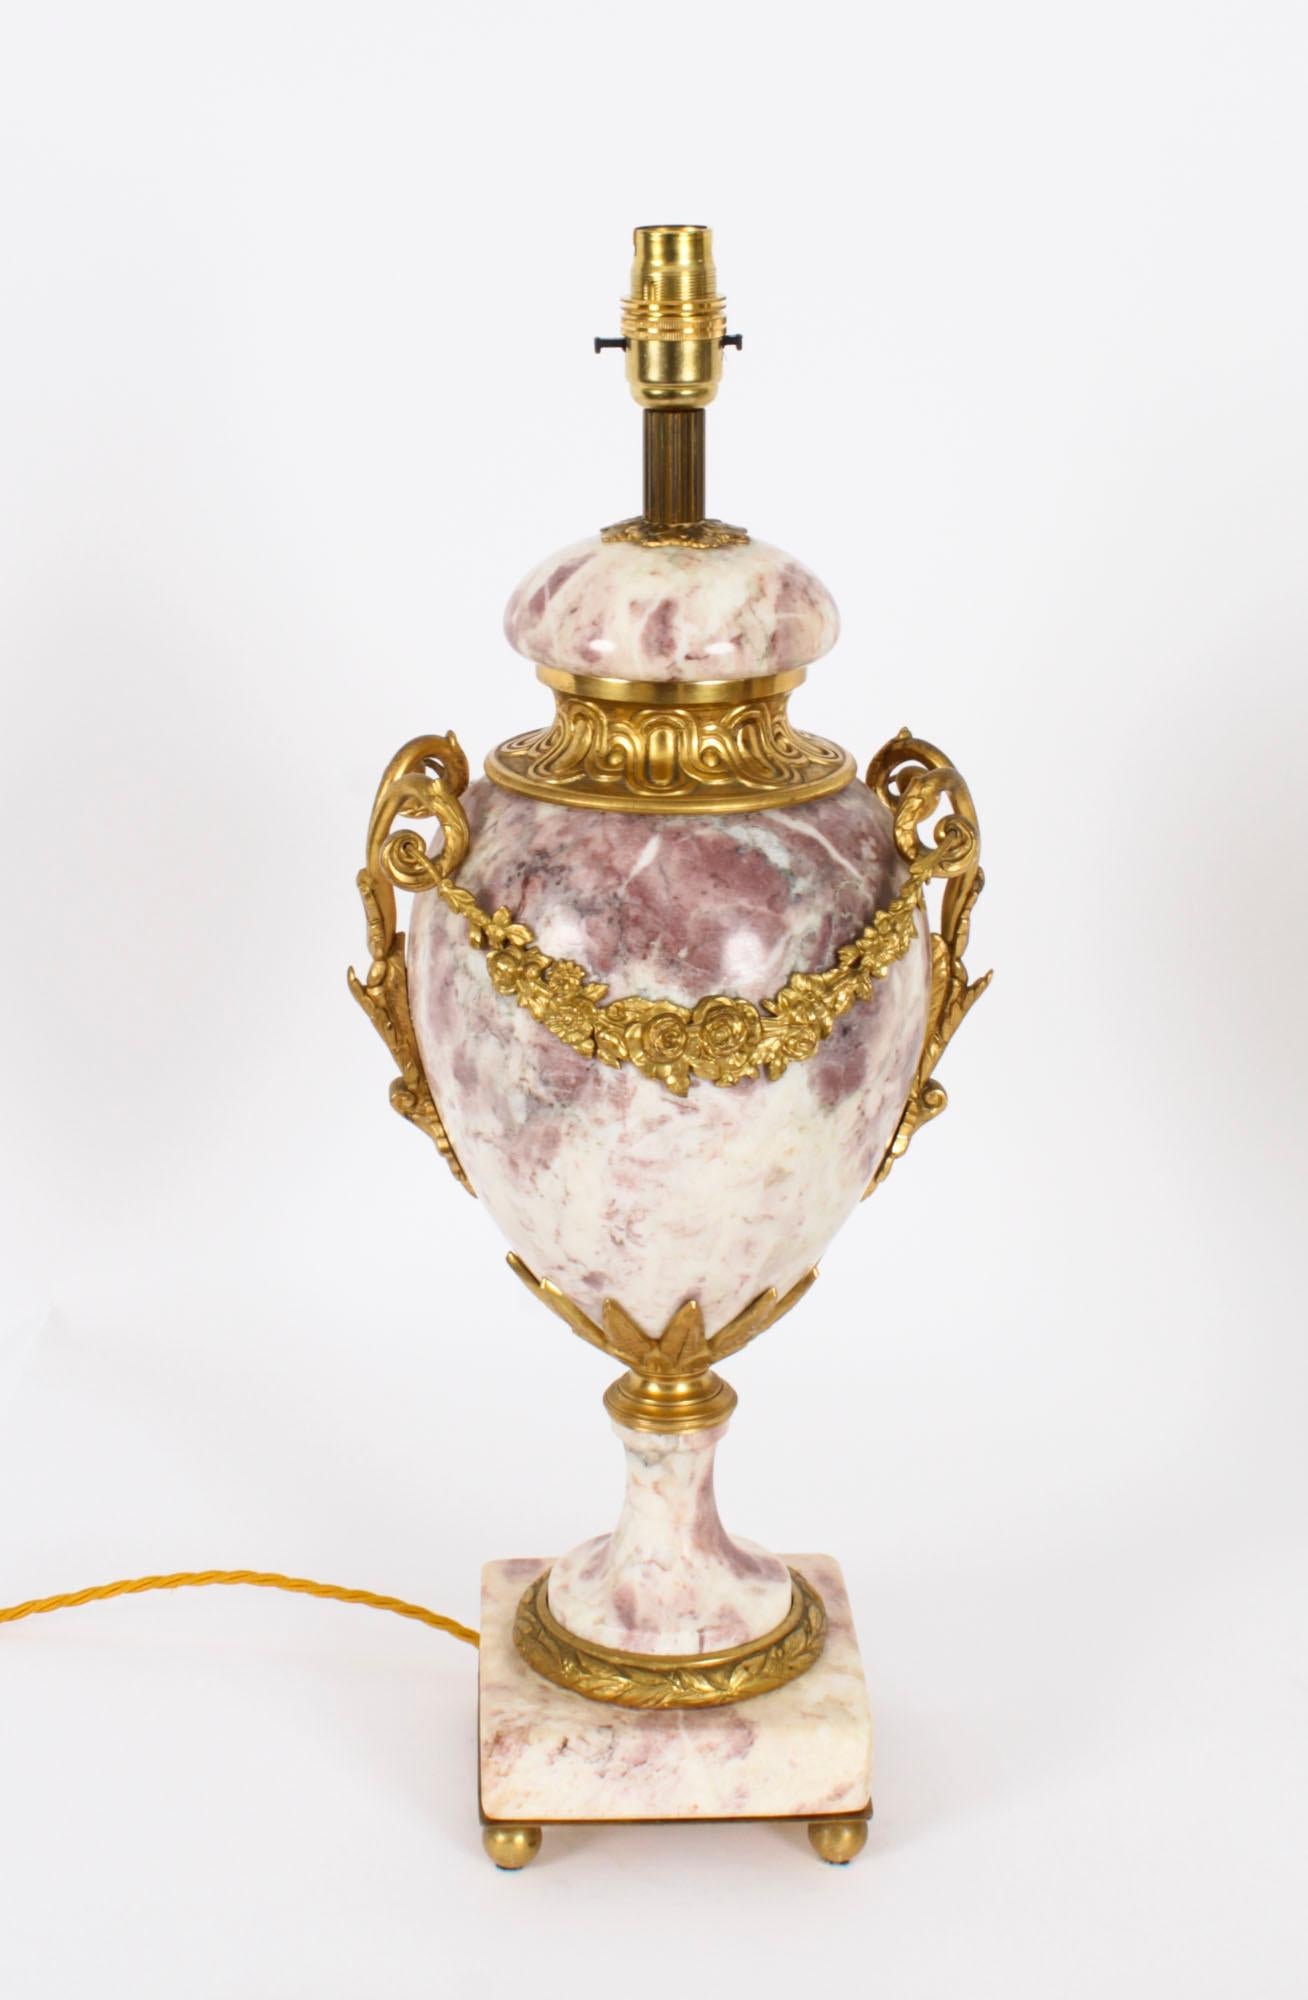 An antique pair of French Louis XVI Revival ormolu mounted pink and white Variegated marble Neo Classical table lamps, Circa 1860 in date.

The pair are of baluster form with twin scroll ormolu handles and ormolu cartouches, raised on circular